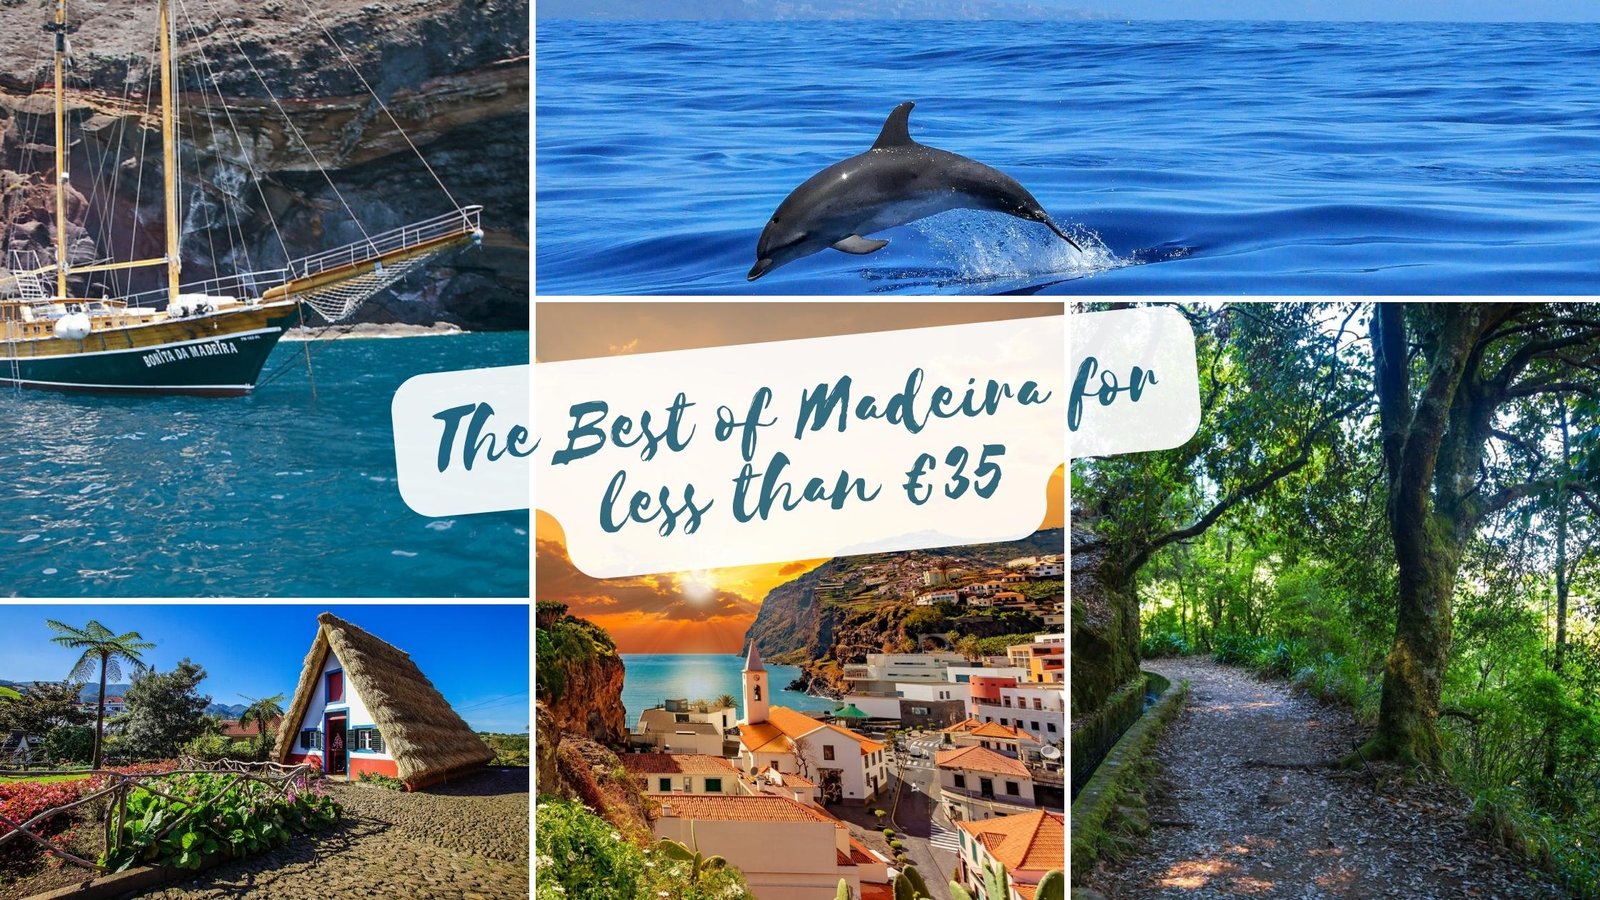 See the Best of our Amazing Madeira for Less than €35